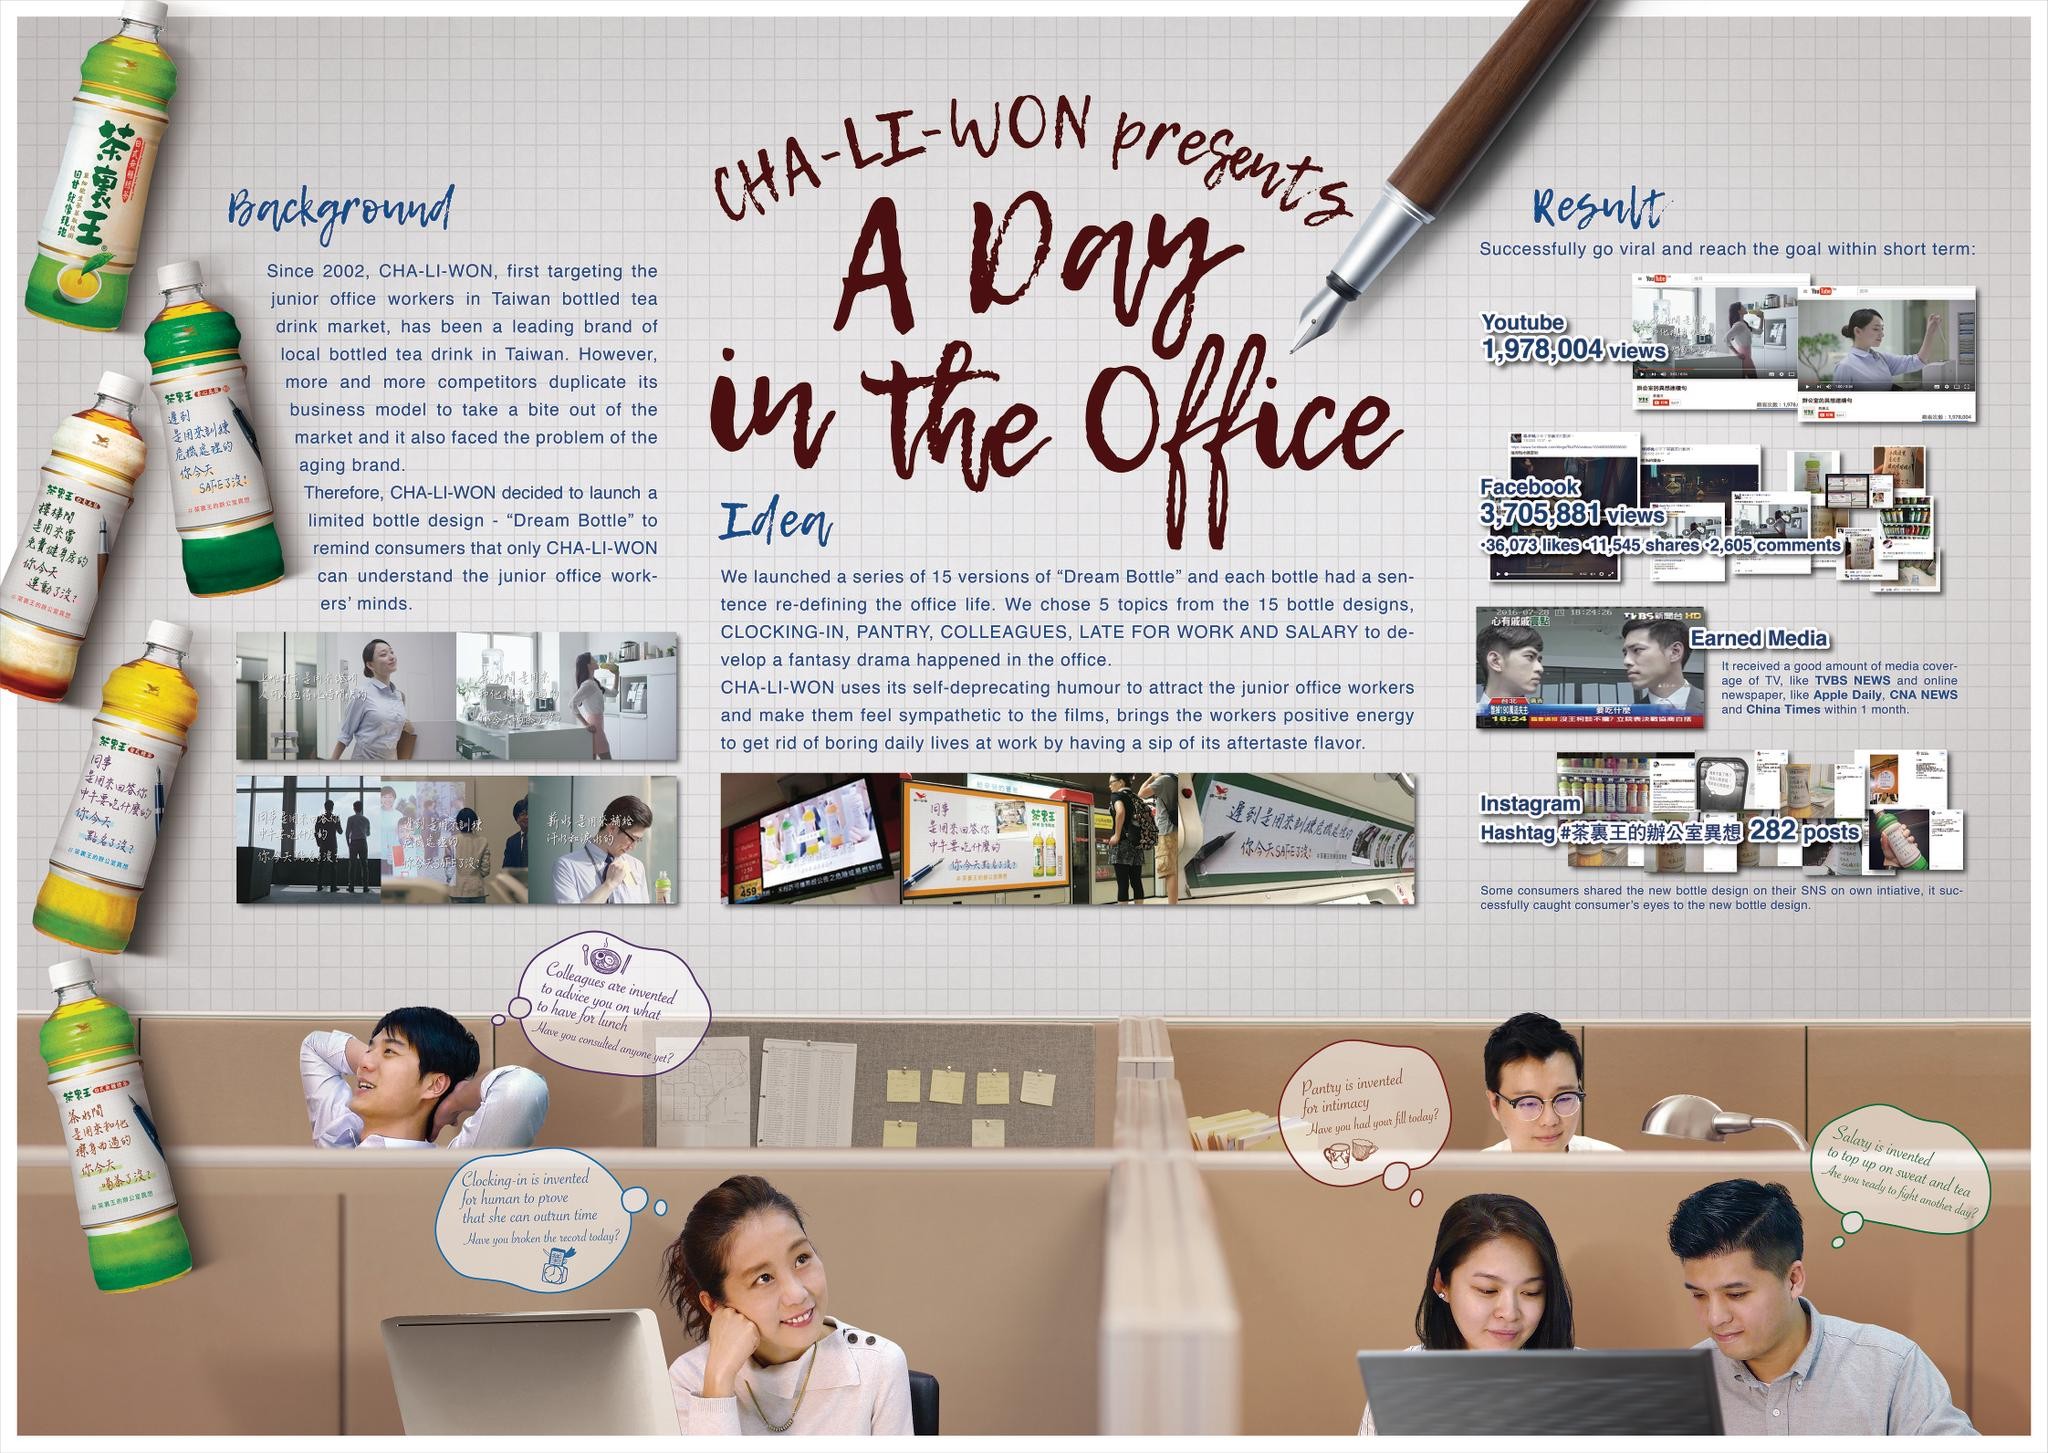 CHA-LI-WON Presents A Day in the Office